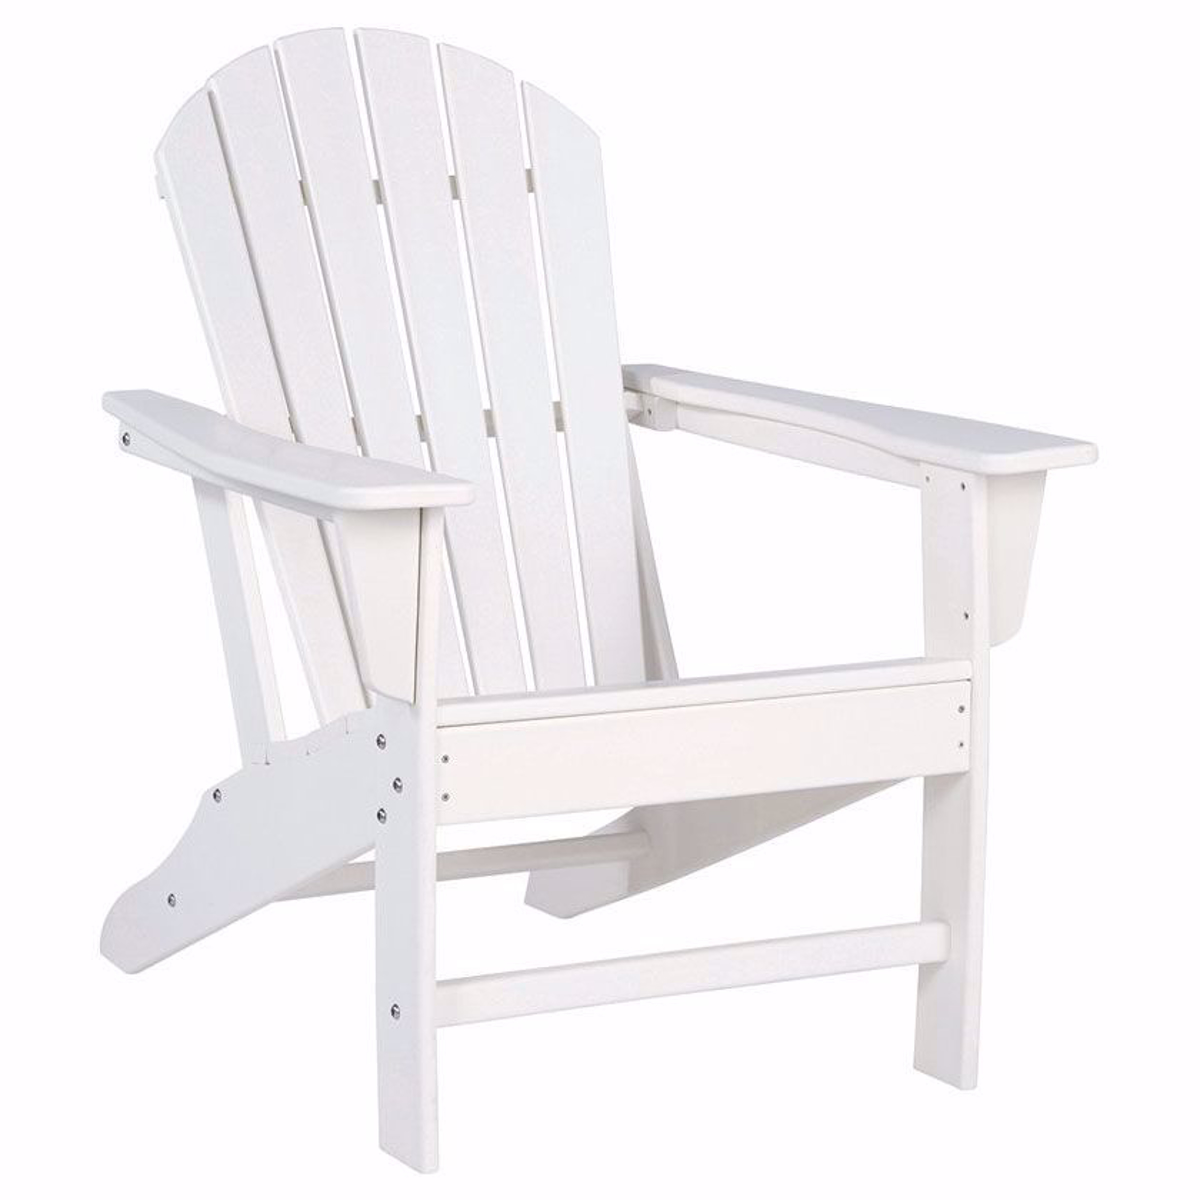 Picture of White Outdoor Adirondack Chair